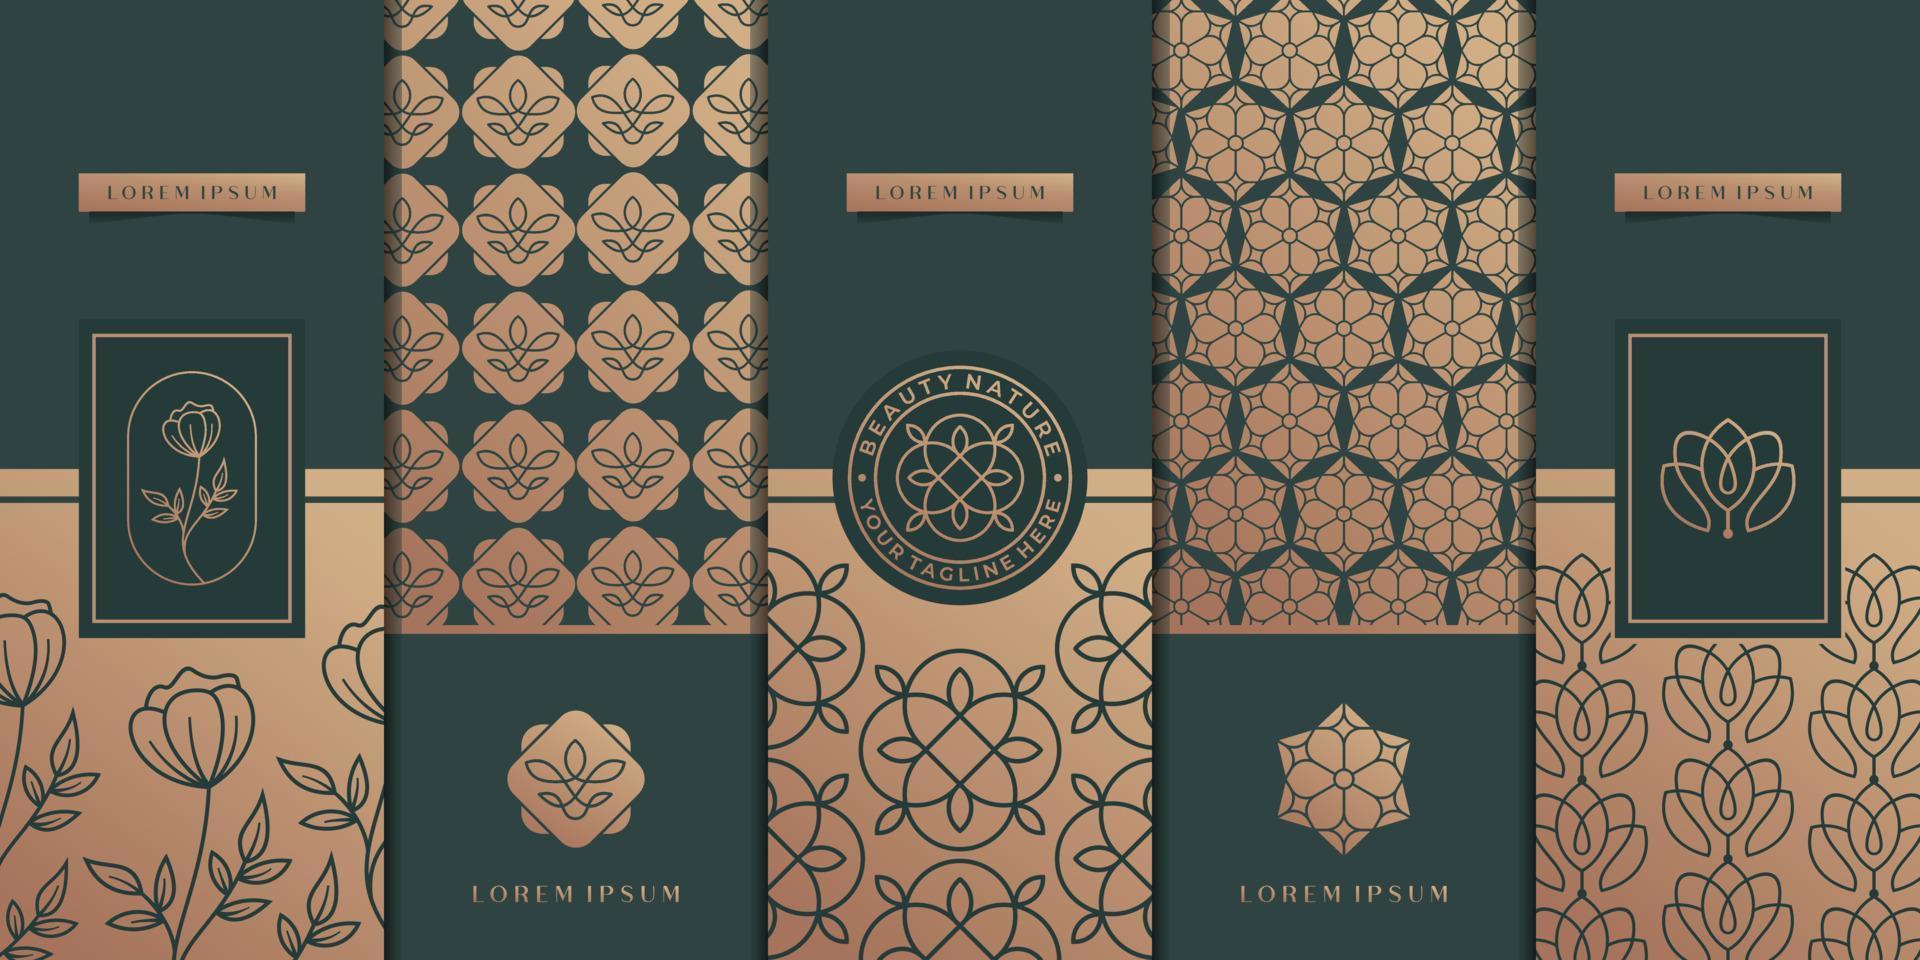 Collection of design elements,labels,icon,frames, for logo,packaging,design of luxury products. luxury golden packaging design flower,nature,pattern,minimalist design for packaging inspiration. vector